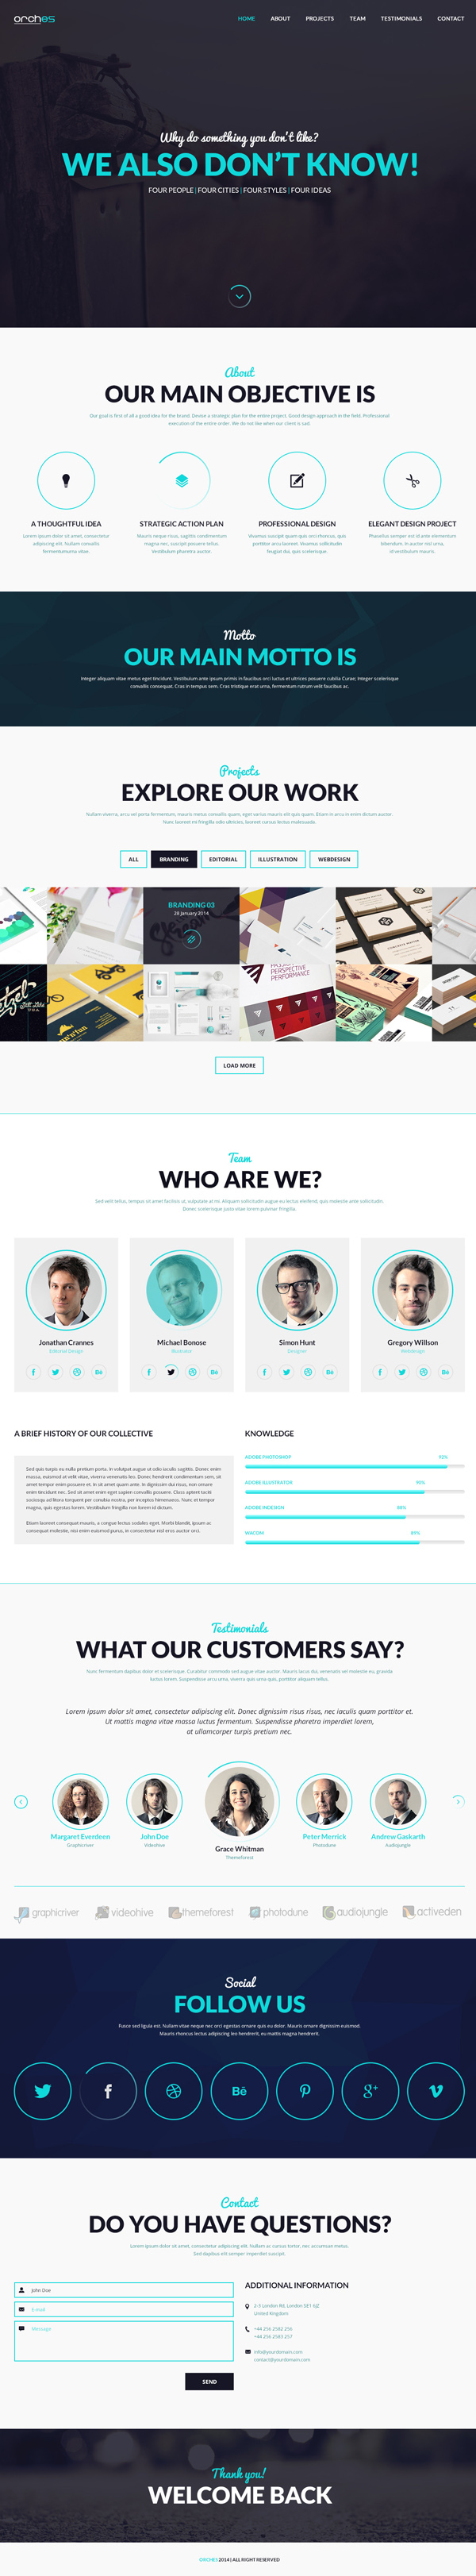 Orches PSD Theme - One Page HTML5 Template